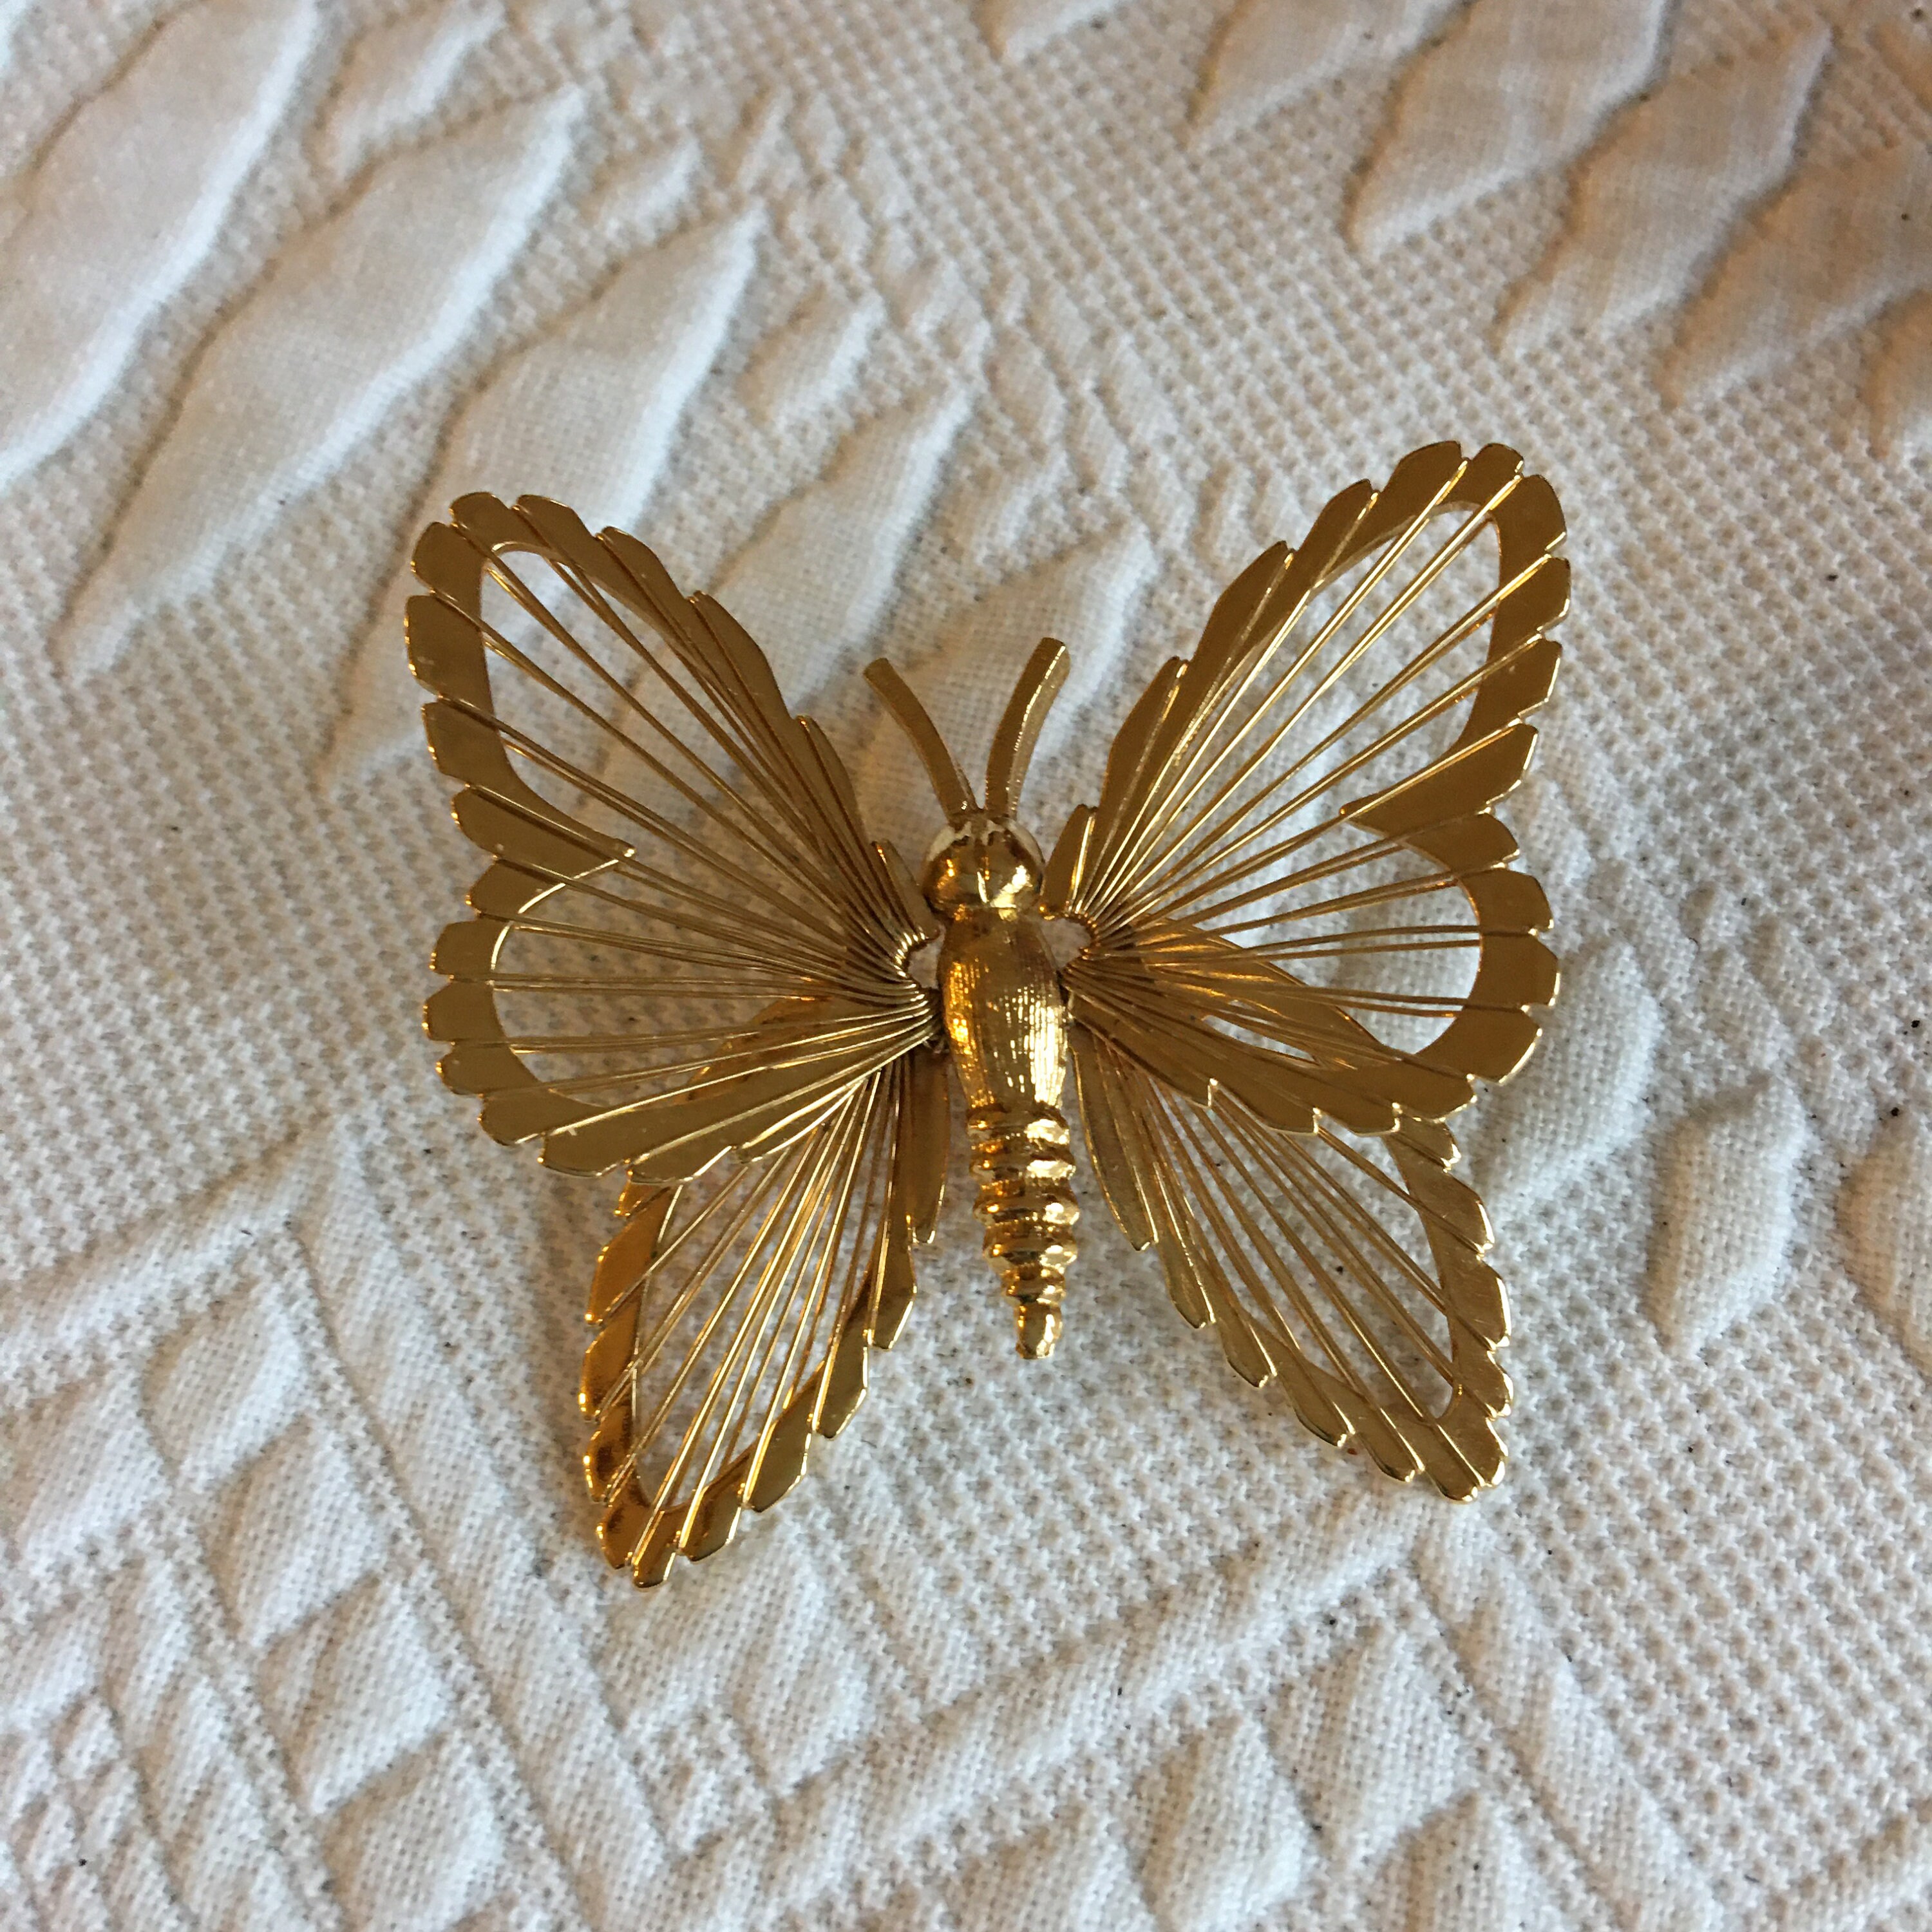 Chanel Enamel Butterfly Pin - Gold-Tone Metal Pin, Brooches - CHA105707